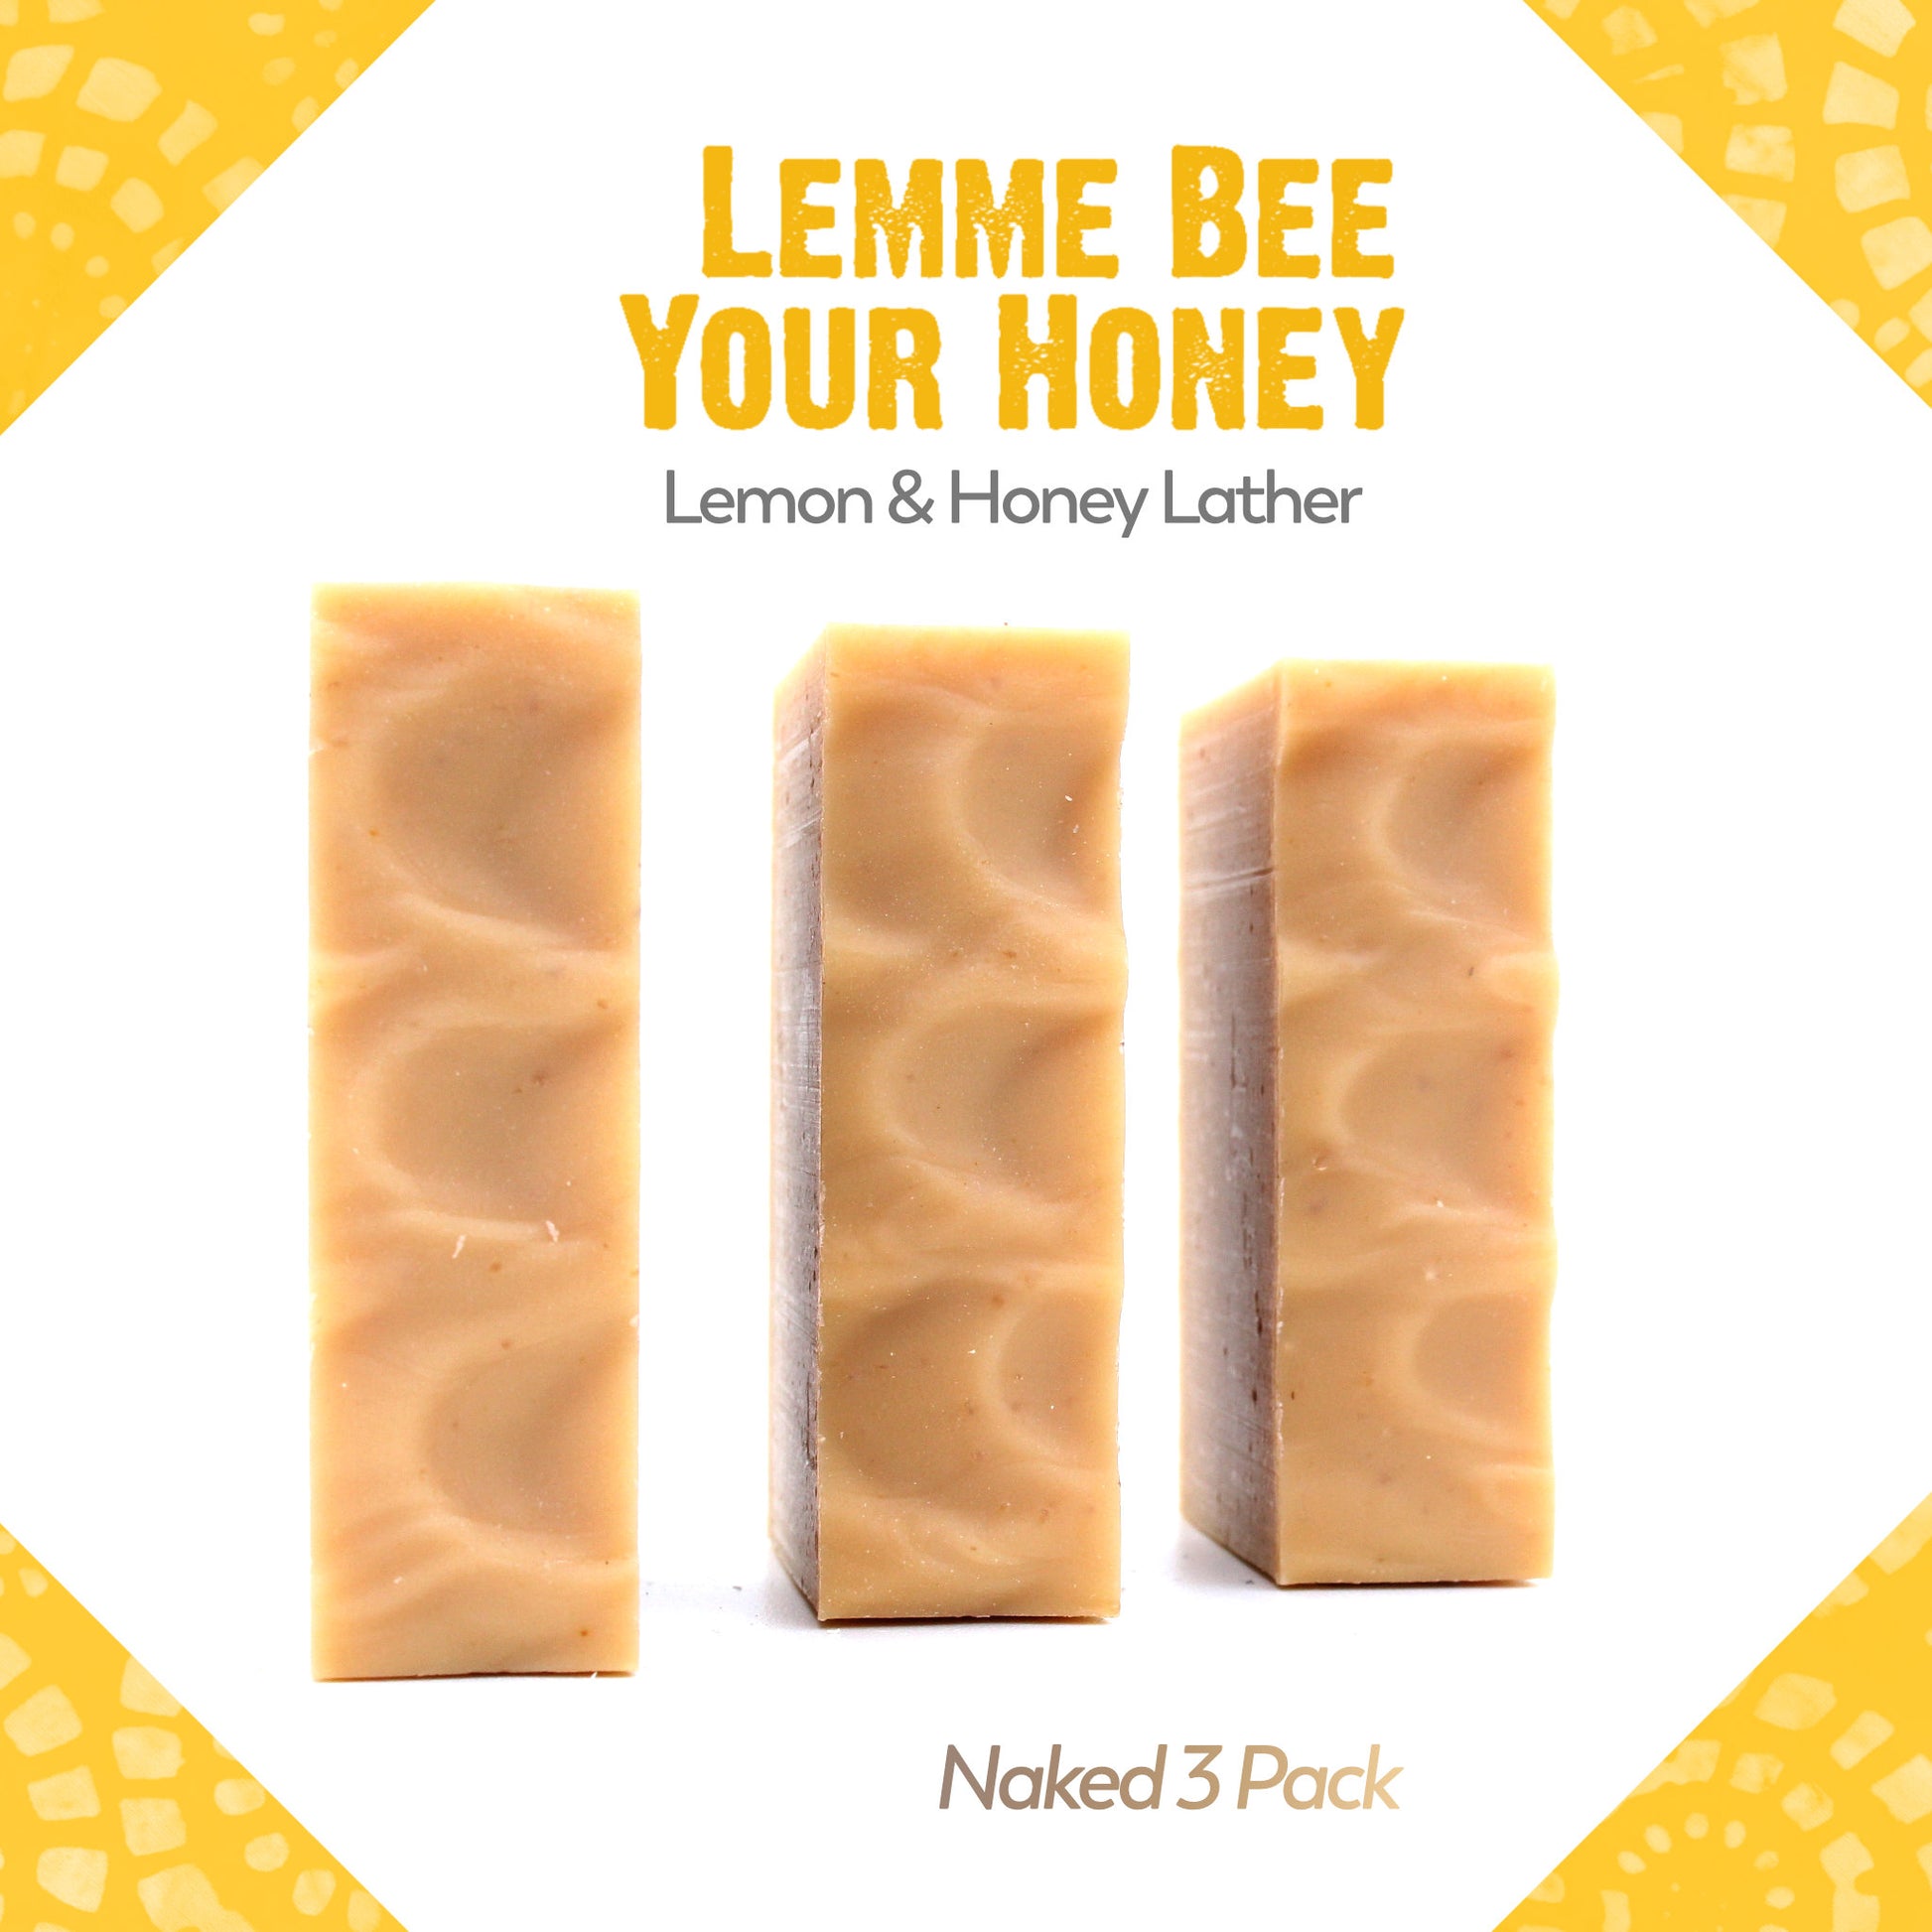 A naked three pack of Lemme Bee Your Honey lemon essential oil and honey organic bar soap from Ground Soap.